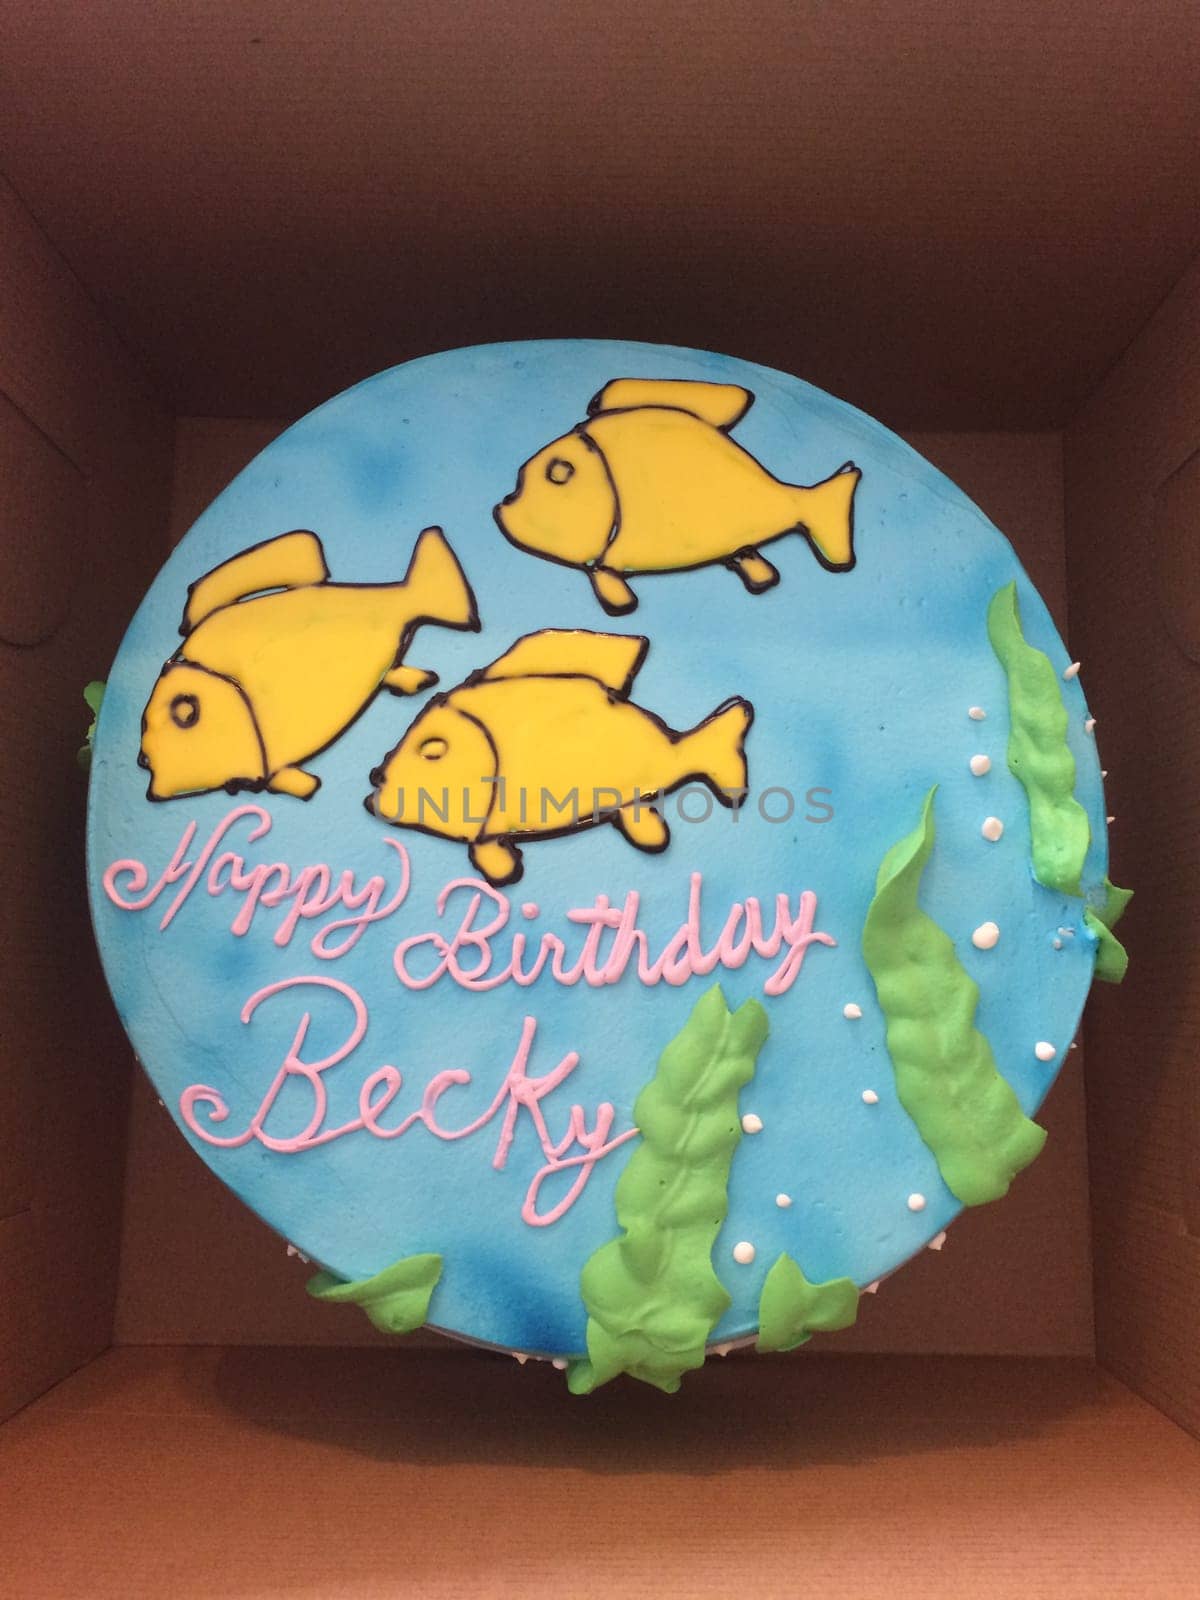 Birthday Cake in a Box with Fish Swimming Underwater by grumblytumbleweed